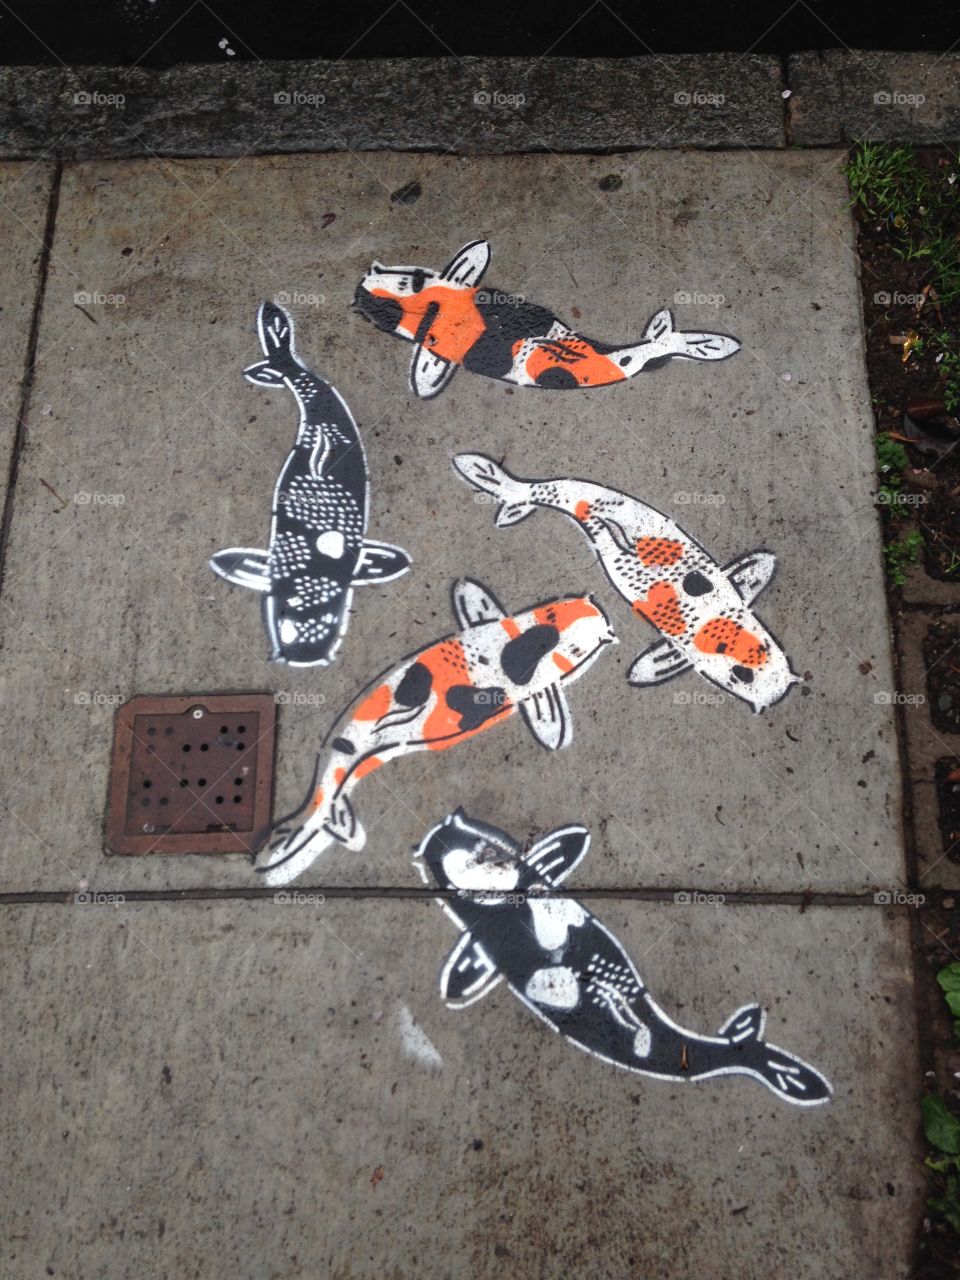 Coy Fish Stencil Drawing. A bright stenciled coy fish drawing on a sidewalk in the Mission District in San Francisco, CA.